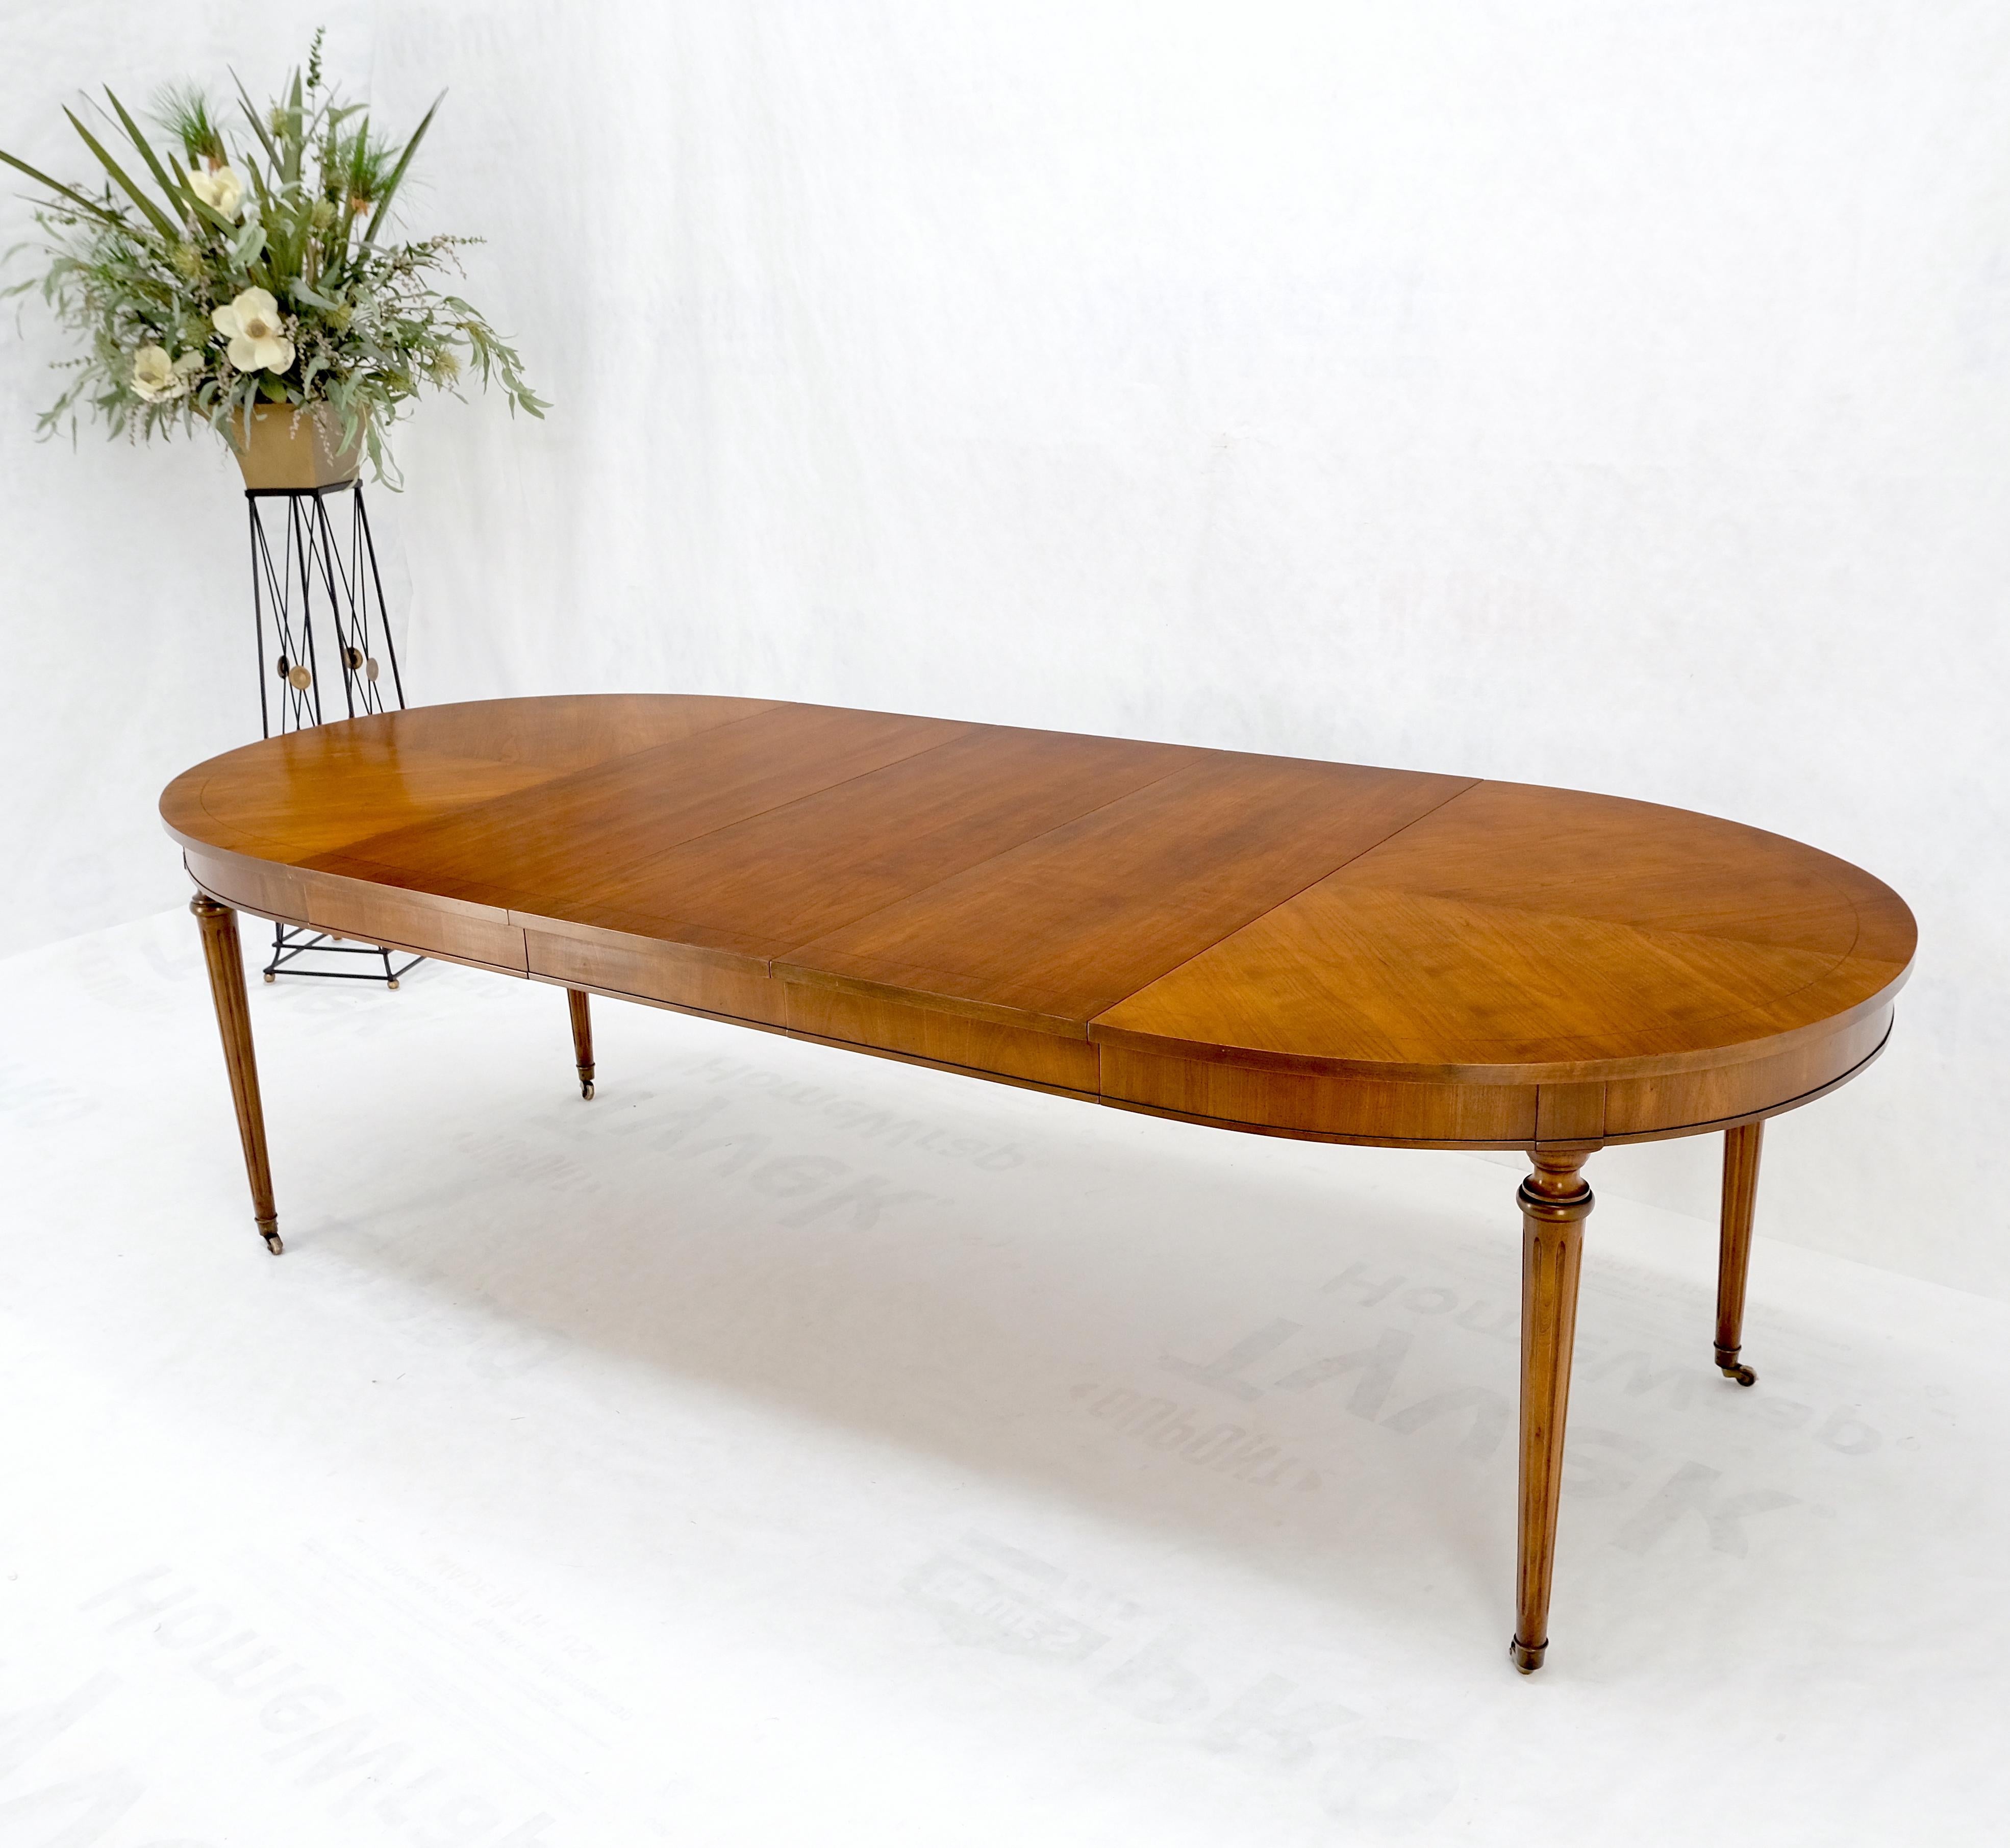 American Mid-Century Oval Satinwood DiningTable 3 Leaves Fluted Tapered Leg Mint For Sale 2